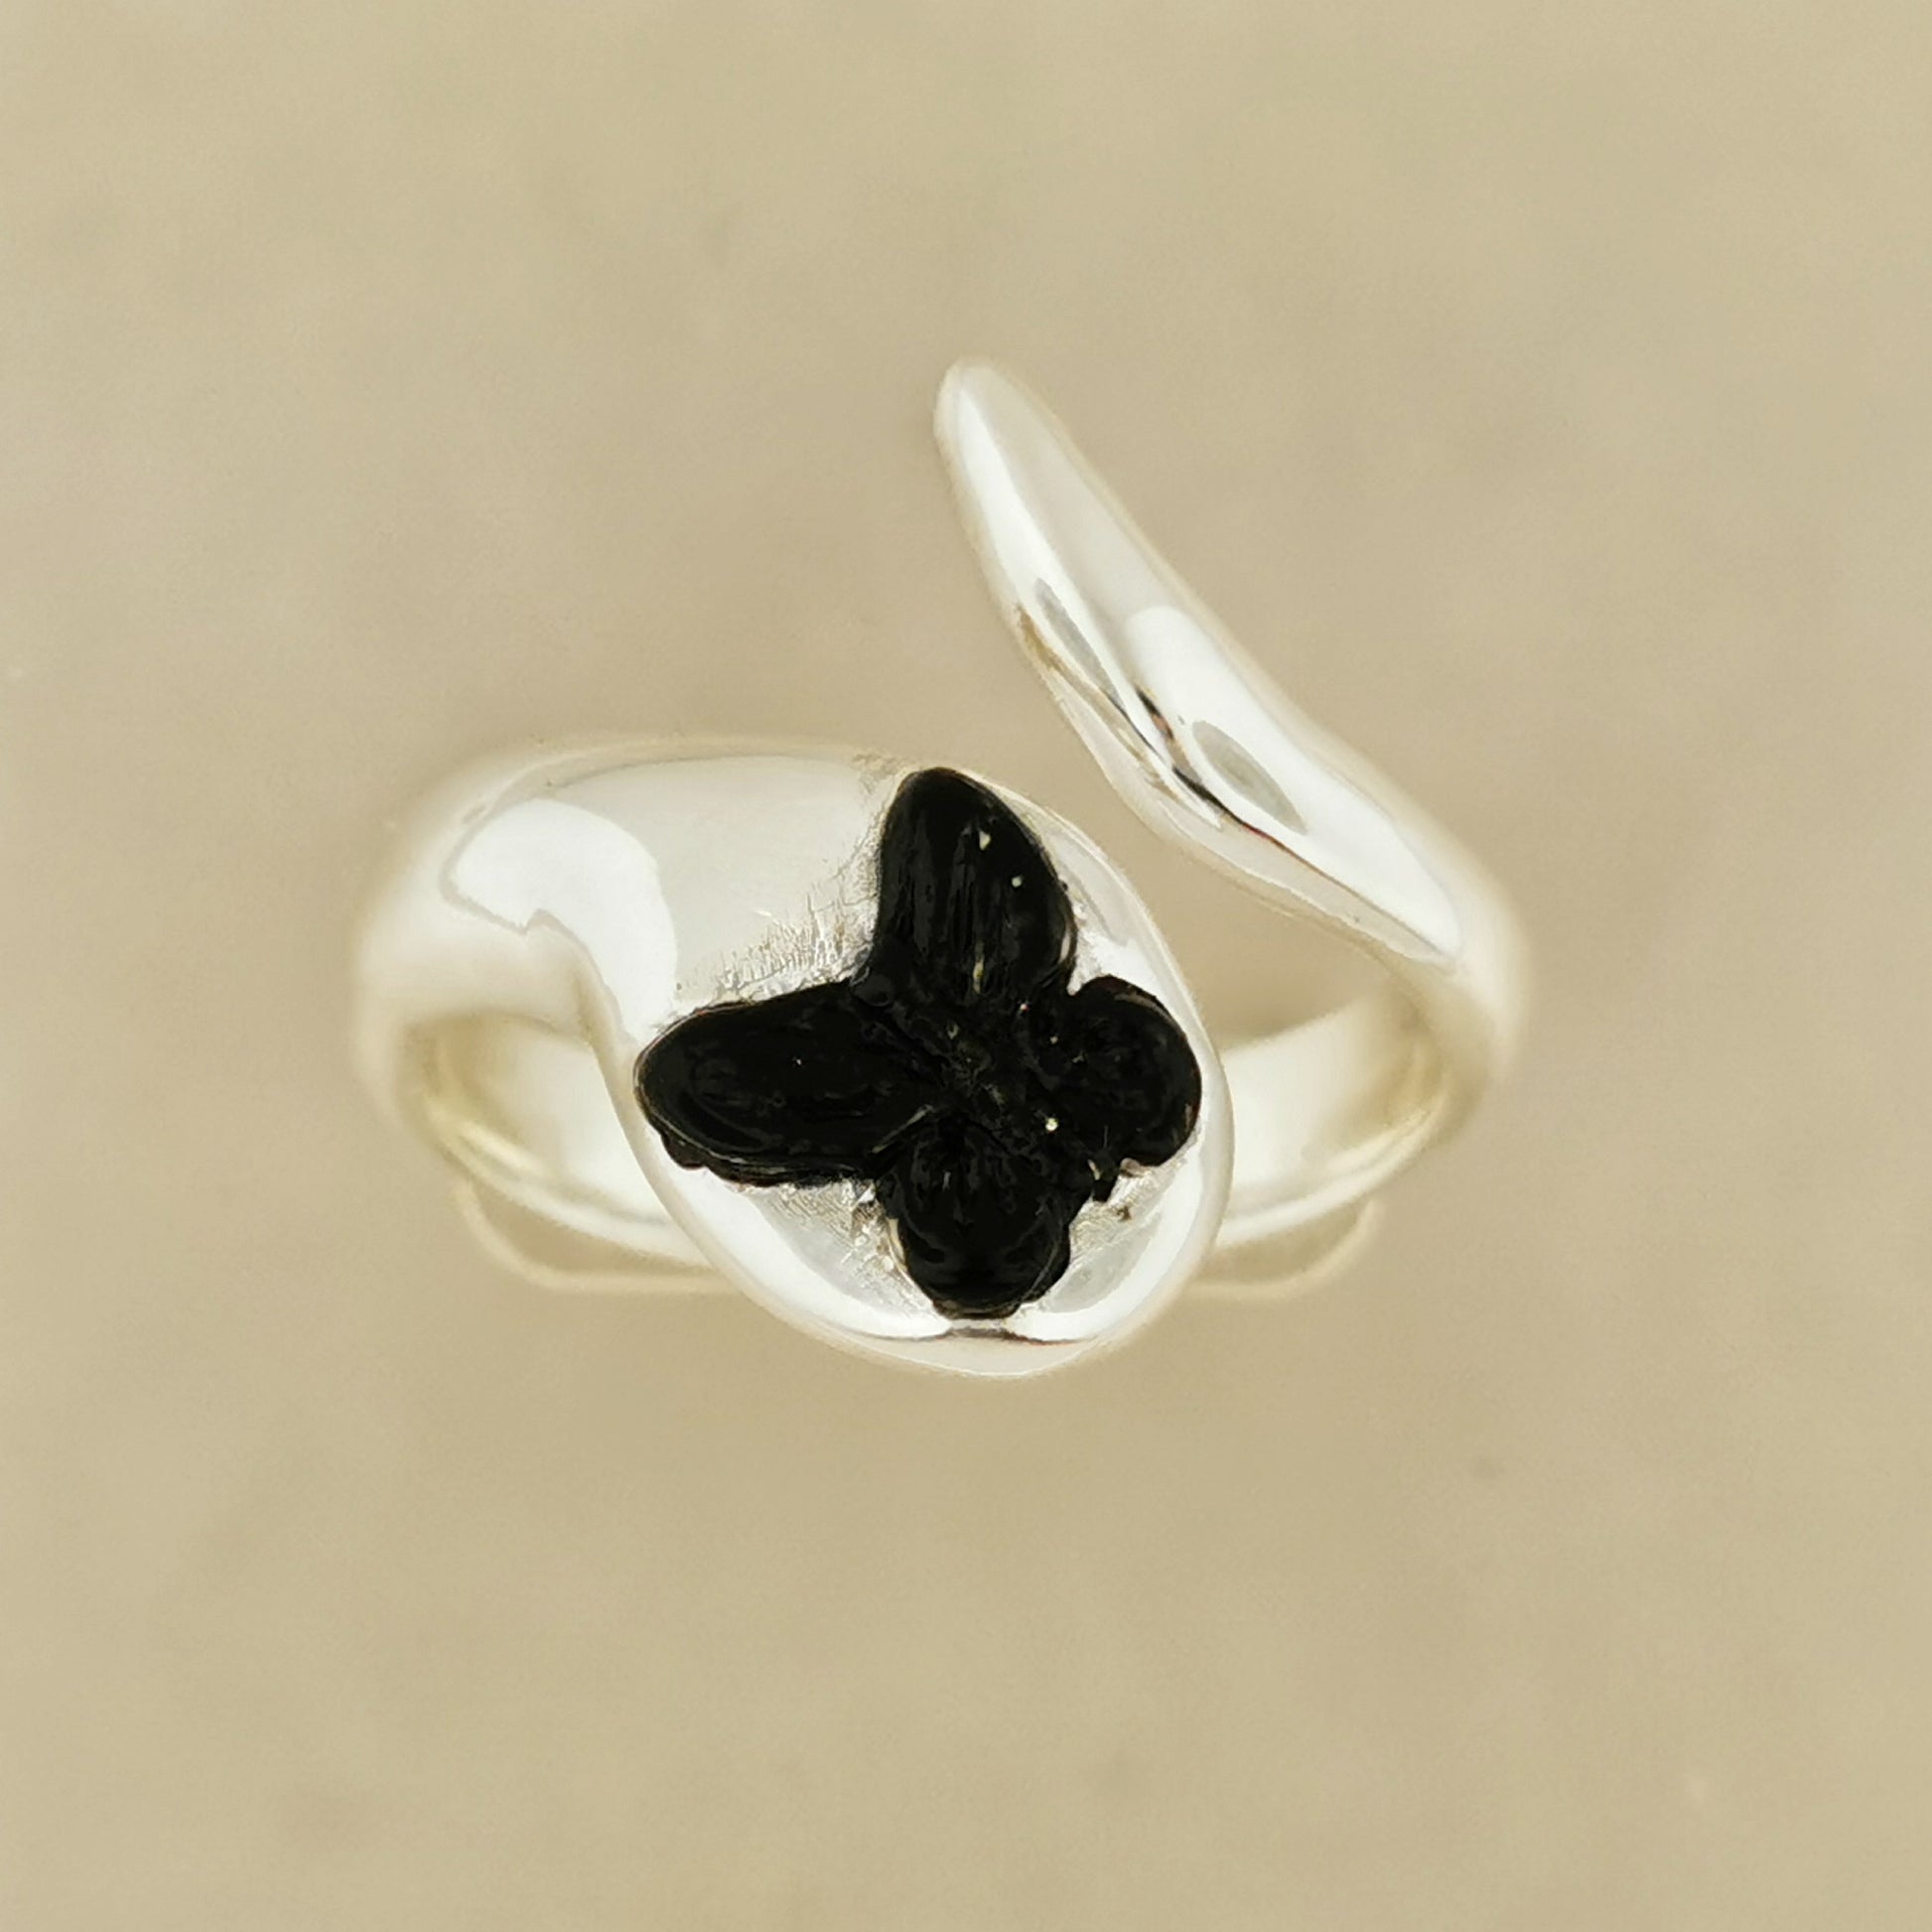 Death Butterfly Ring in Sterling Silver or Antique Bronze, Anime Ghost Ring, Ghost Orb Ring, black butterfly ring, Adjustable Butterfly Ring, Bronze Butterfly Ring, Silver Butterfly Ring, Silver Anime Ring, Bronze Anime Ring, Anime Lover Jewelry